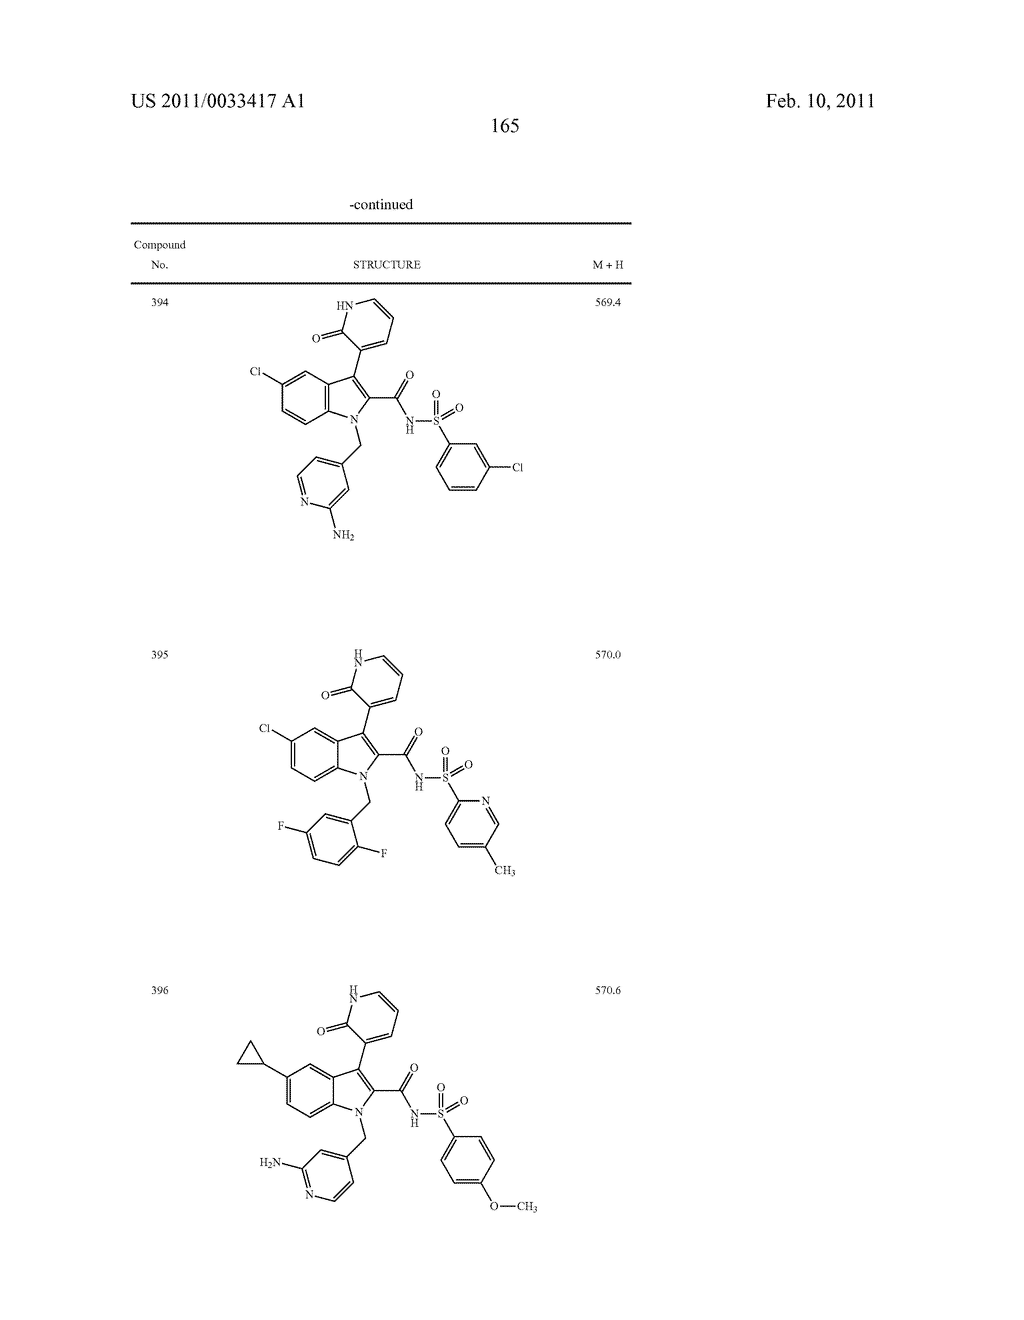 2,3-SUBSTITUTED INDOLE DERIVATIVES FOR TREATING VIRAL INFECTIONS - diagram, schematic, and image 166